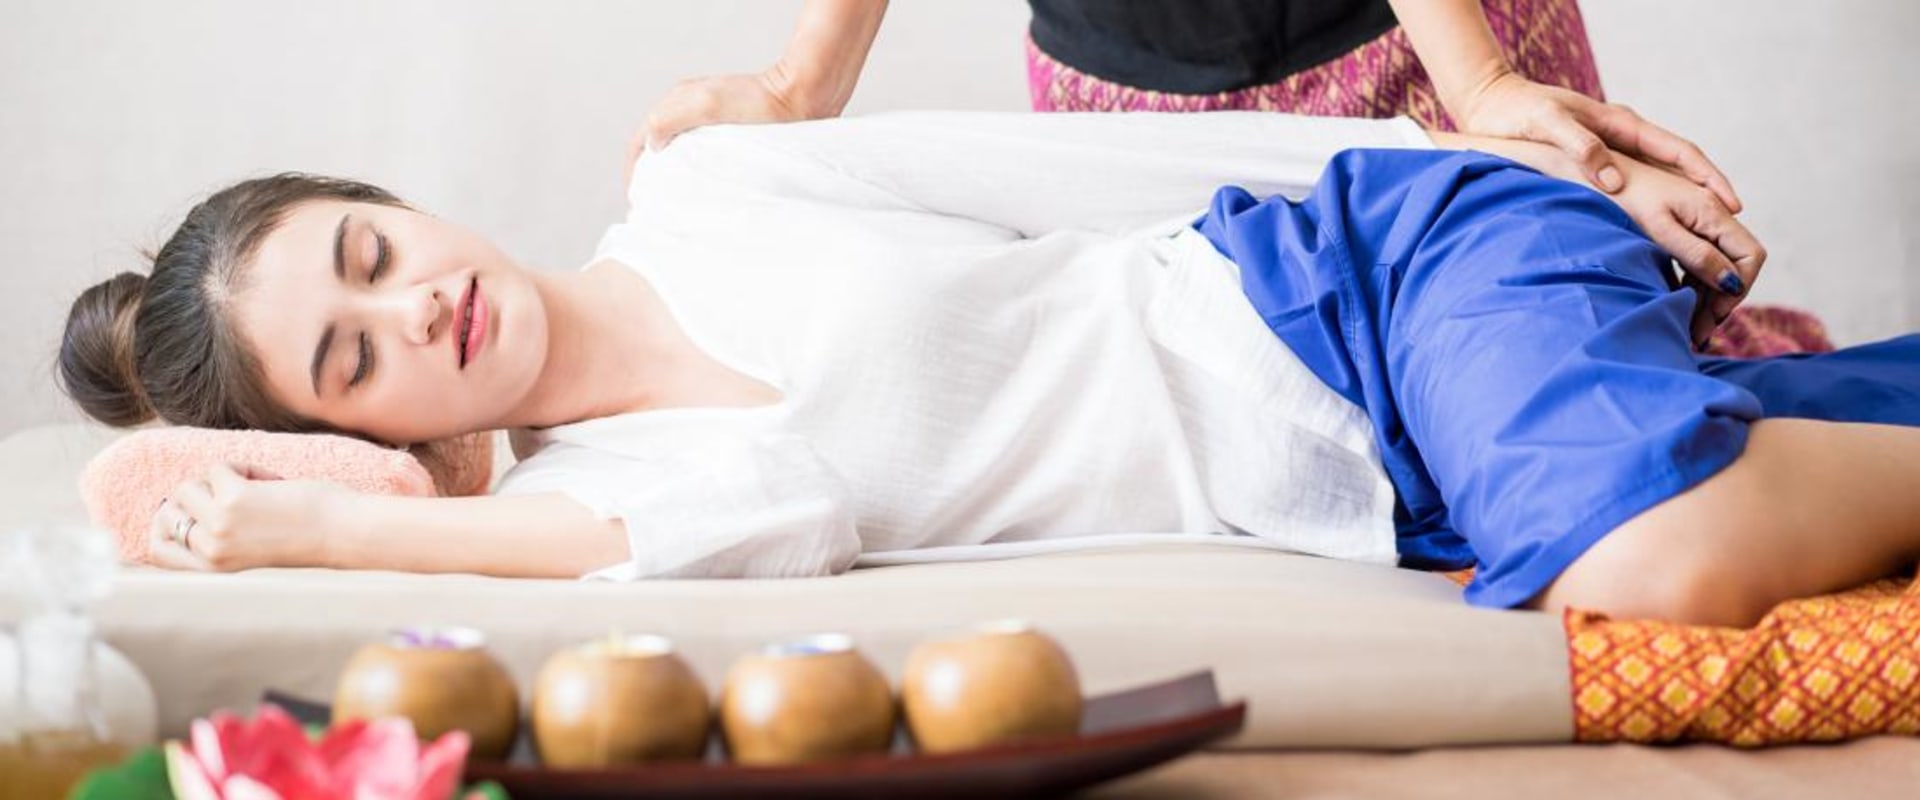 Thai Massage Therapy for Stress Relief